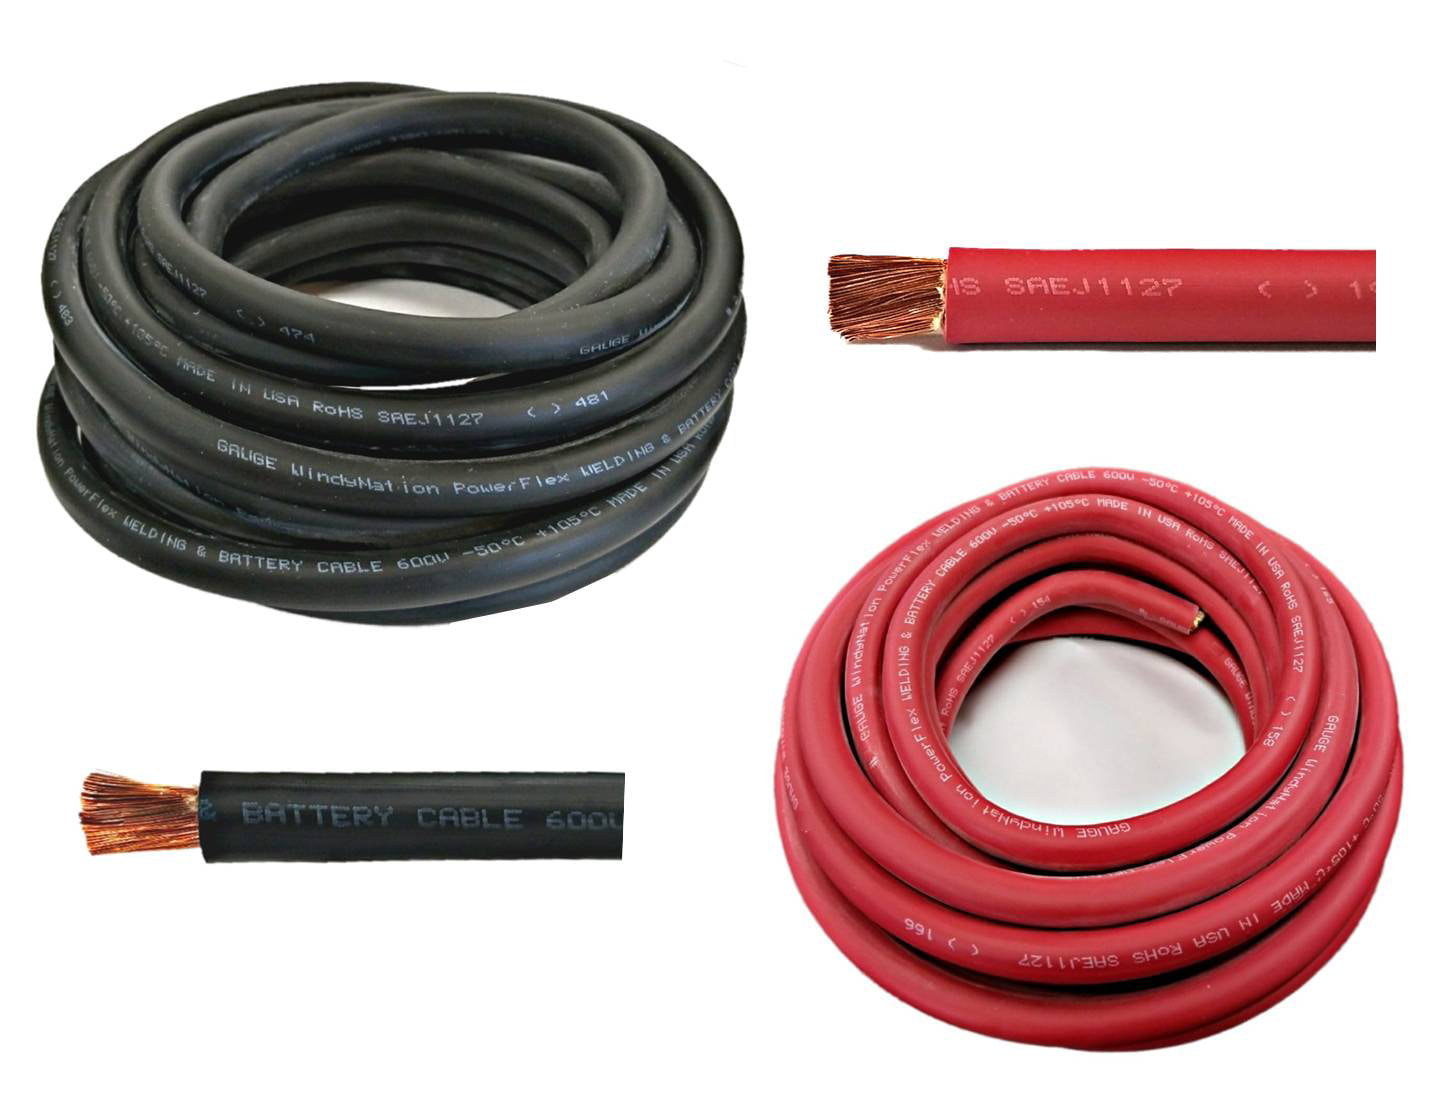 100 FEET FLEXAPRENE Welding Cable #4 Gauge RED 100 AMP USA 4 AWG BATTERY CABLE